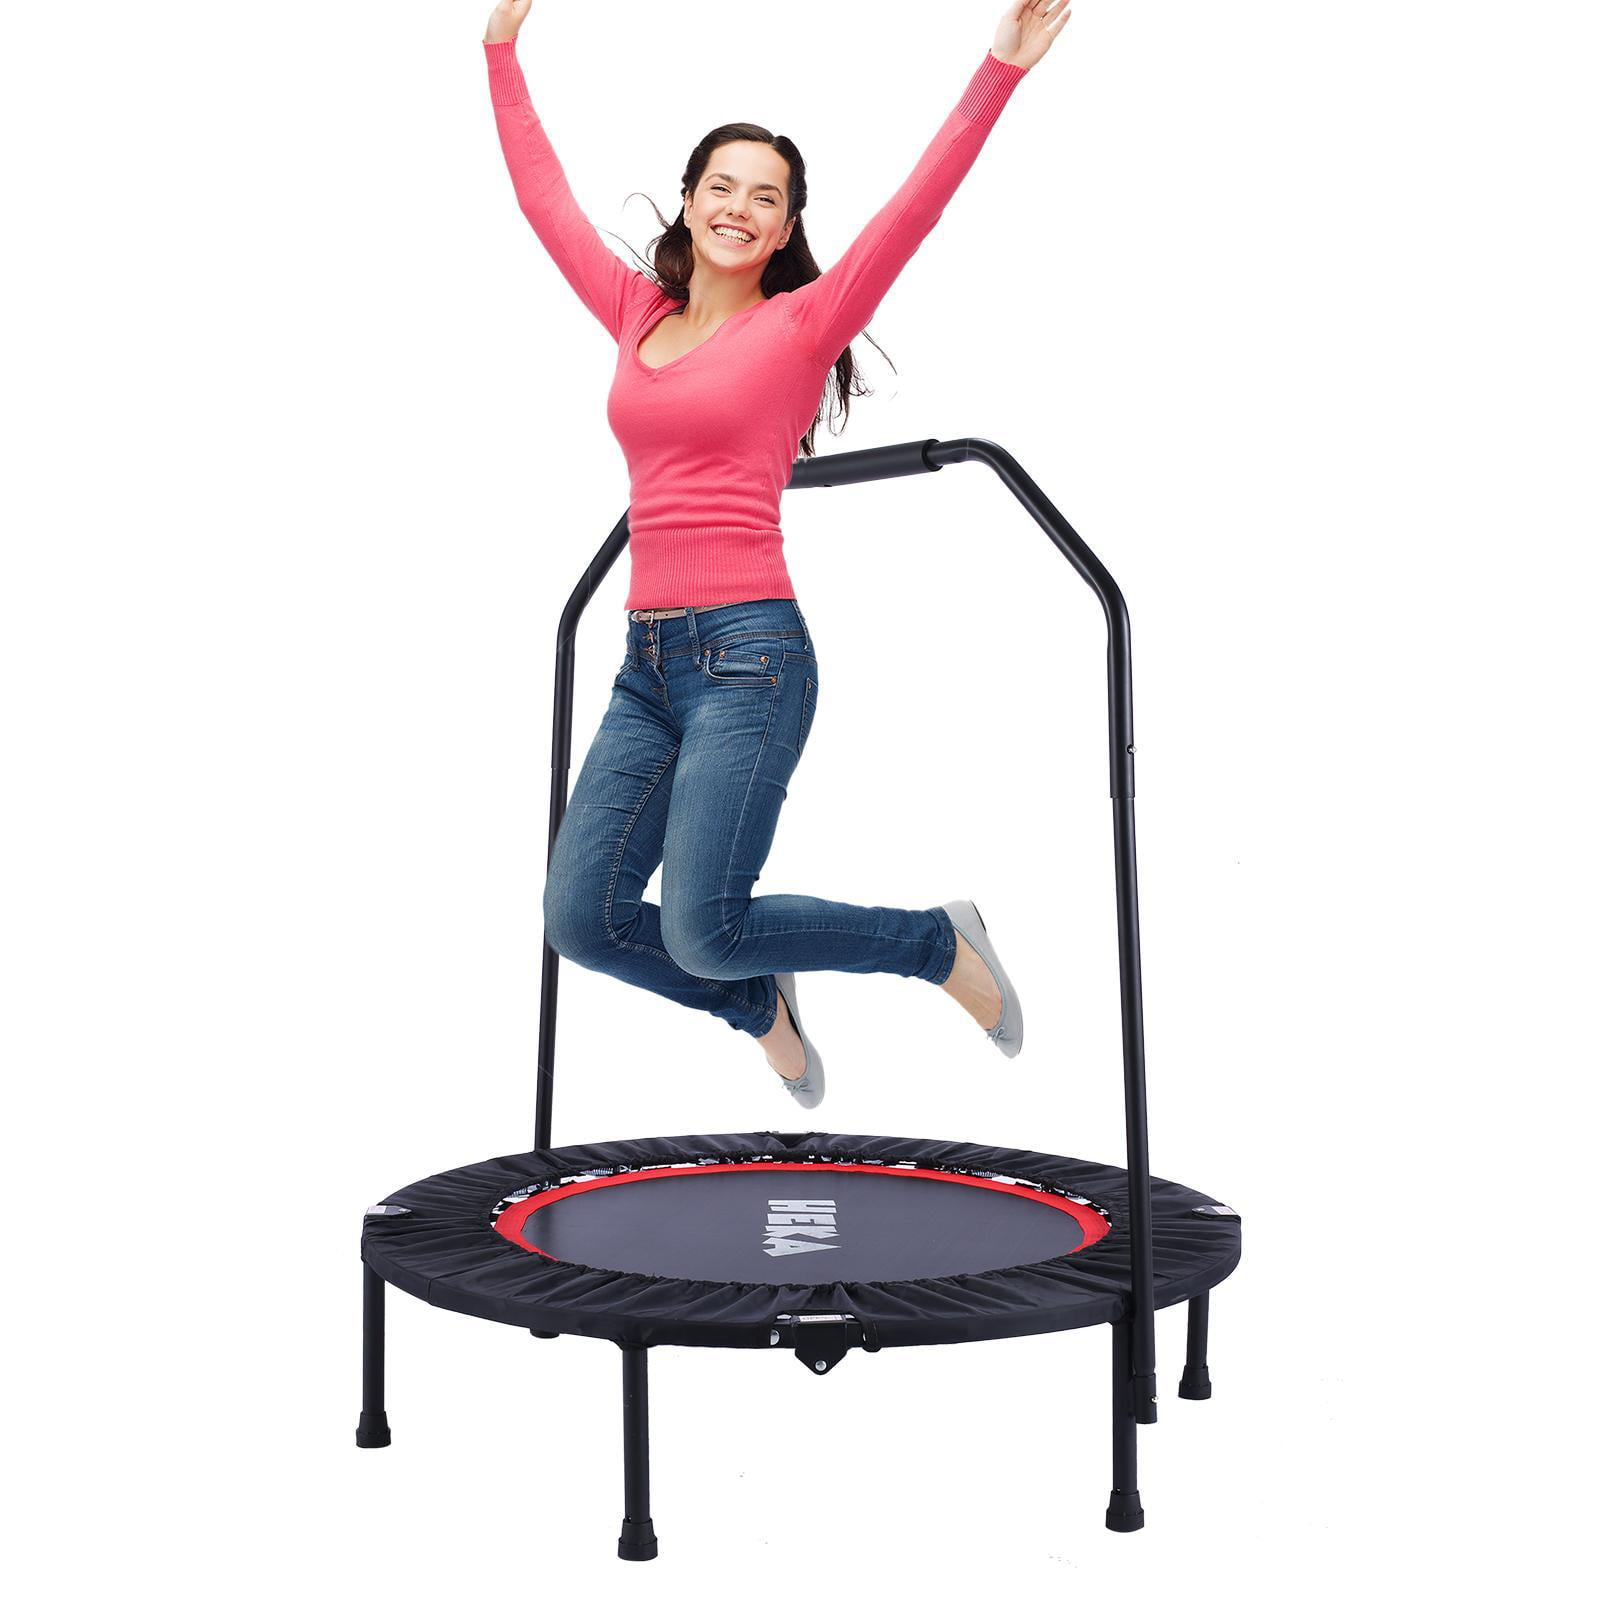 MaxKare Mini Trampoline for Kids Exercise Fitness Hexagon Trampoline Exercise Trampoline for Adults with Foam Adjustable Handle Braid Design Silent for Toddler Indoor Home Use Workout 